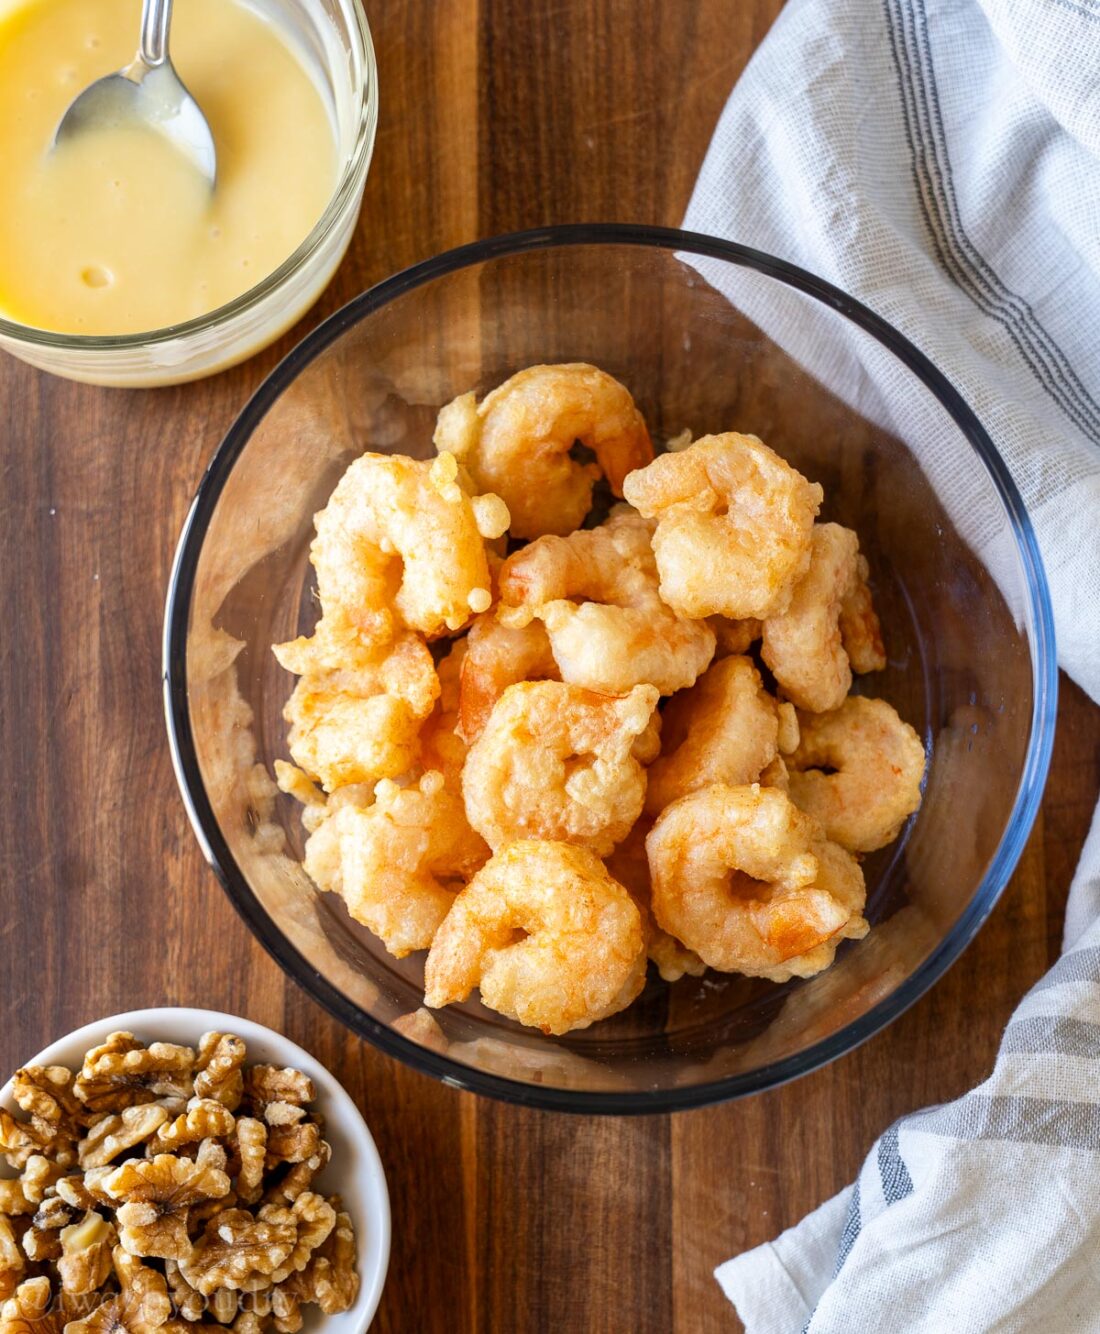 crispy shrimp in bowl with white sauce and walnuts on the side.